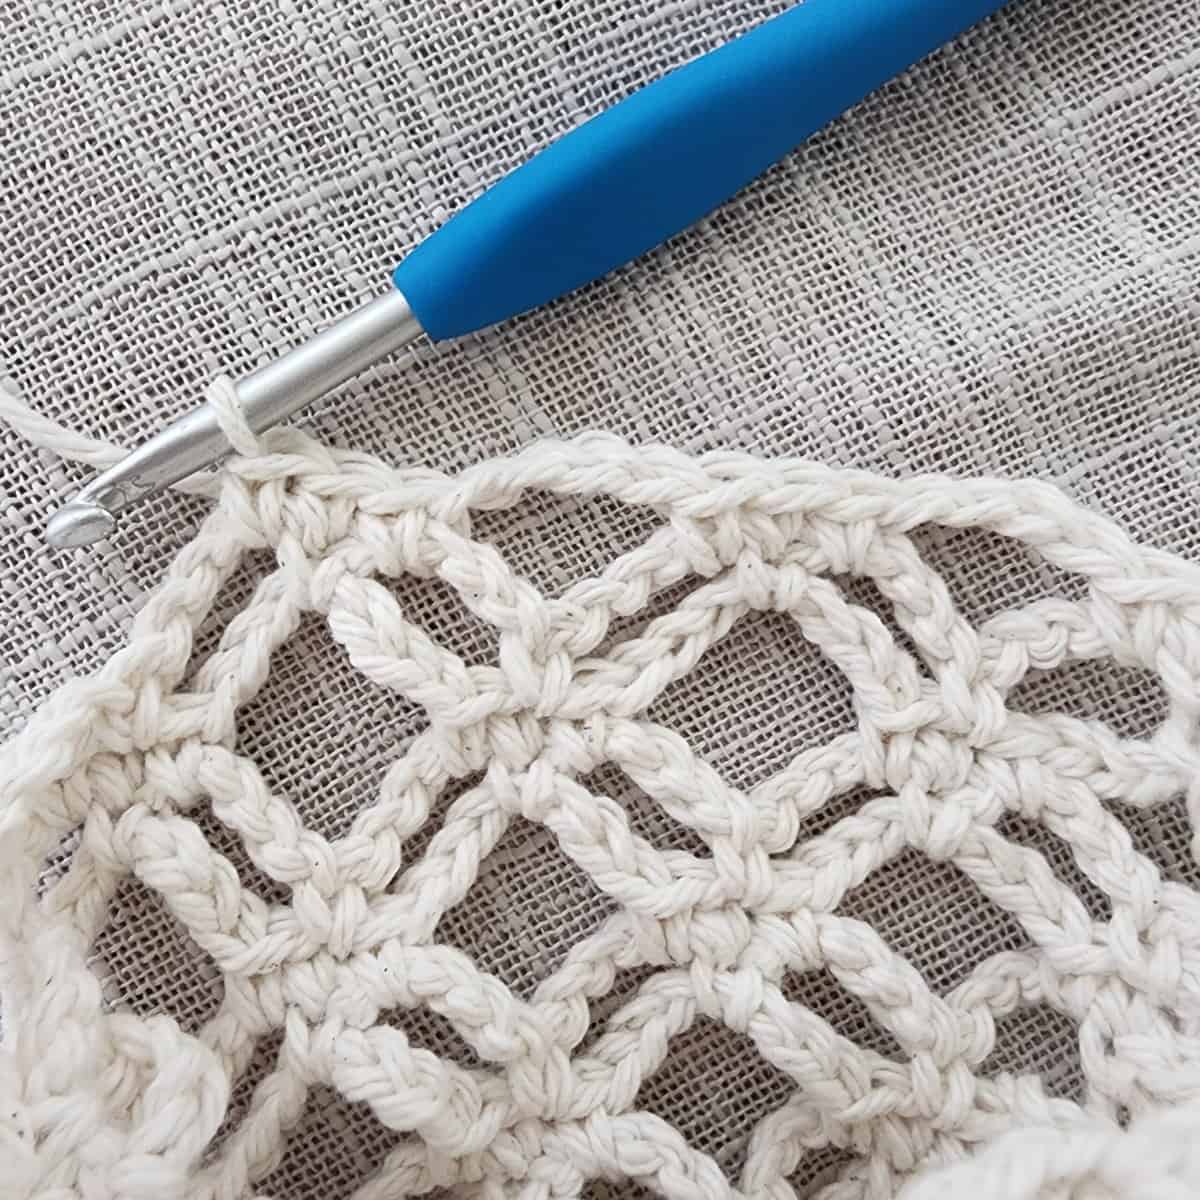 Close up of last round of plant basket being crocheted with blue crochet hook.